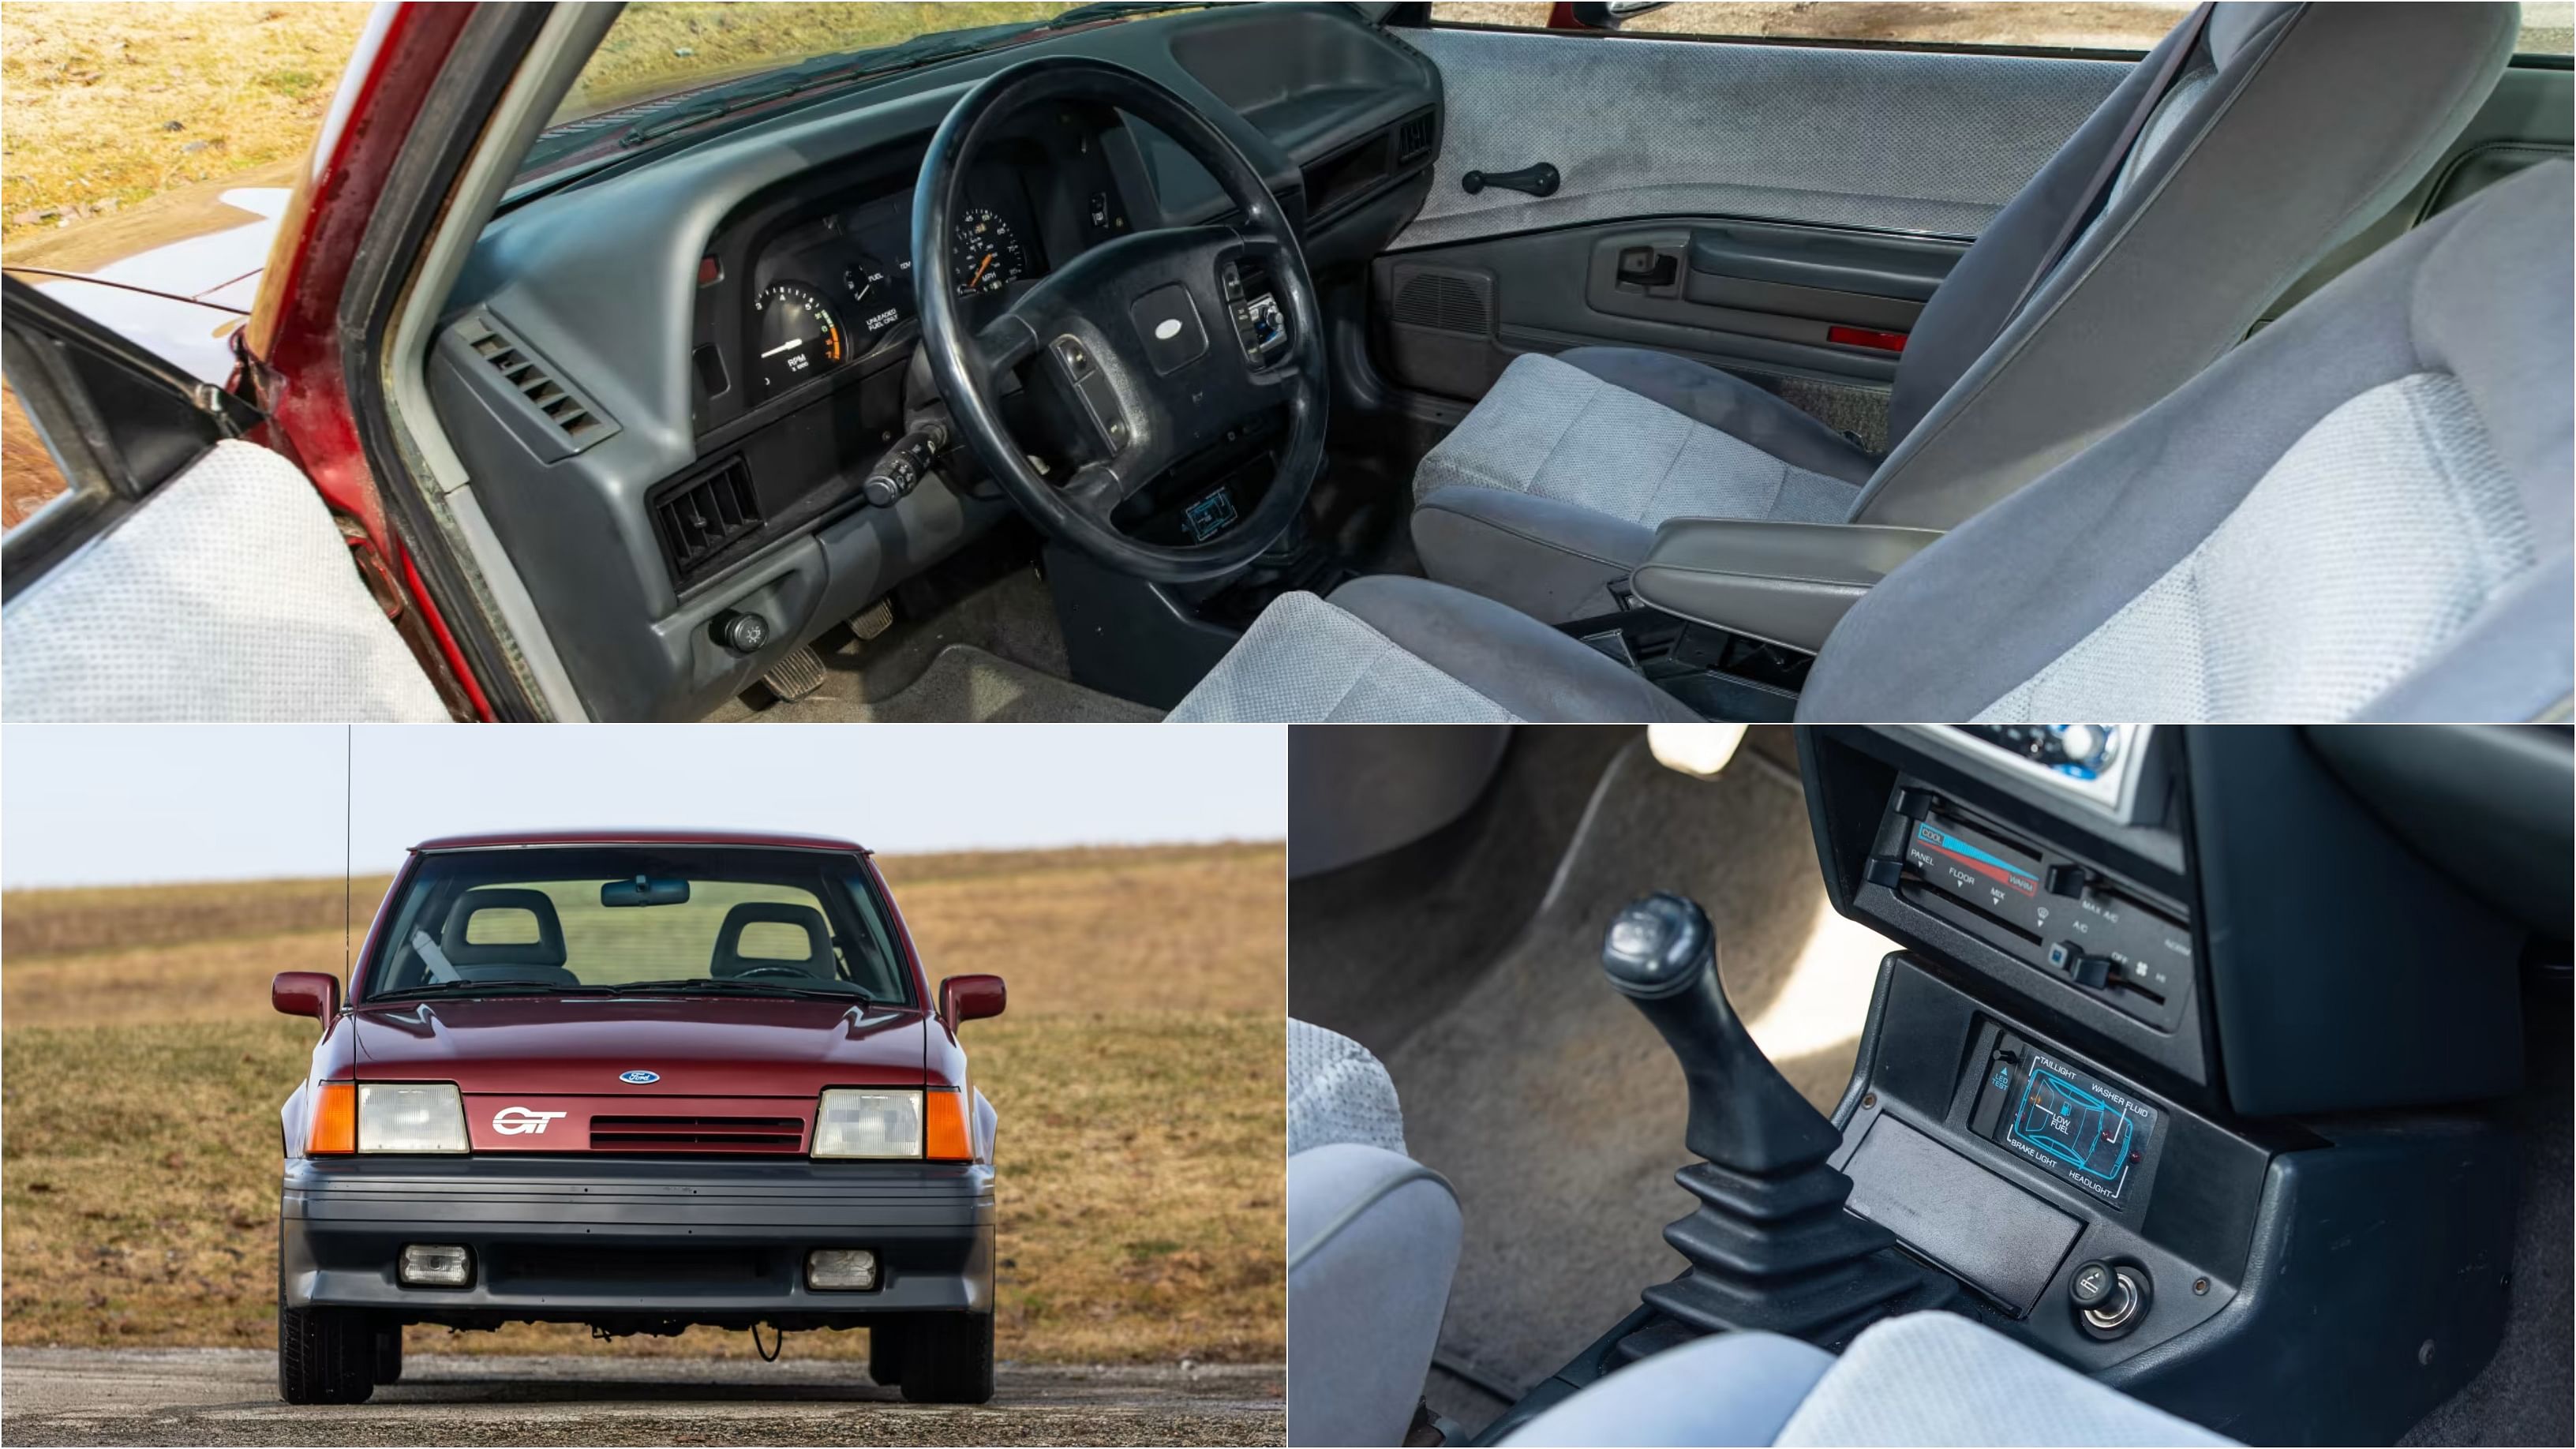 1989 Ford Escort GT front view, gear stick, and cabin